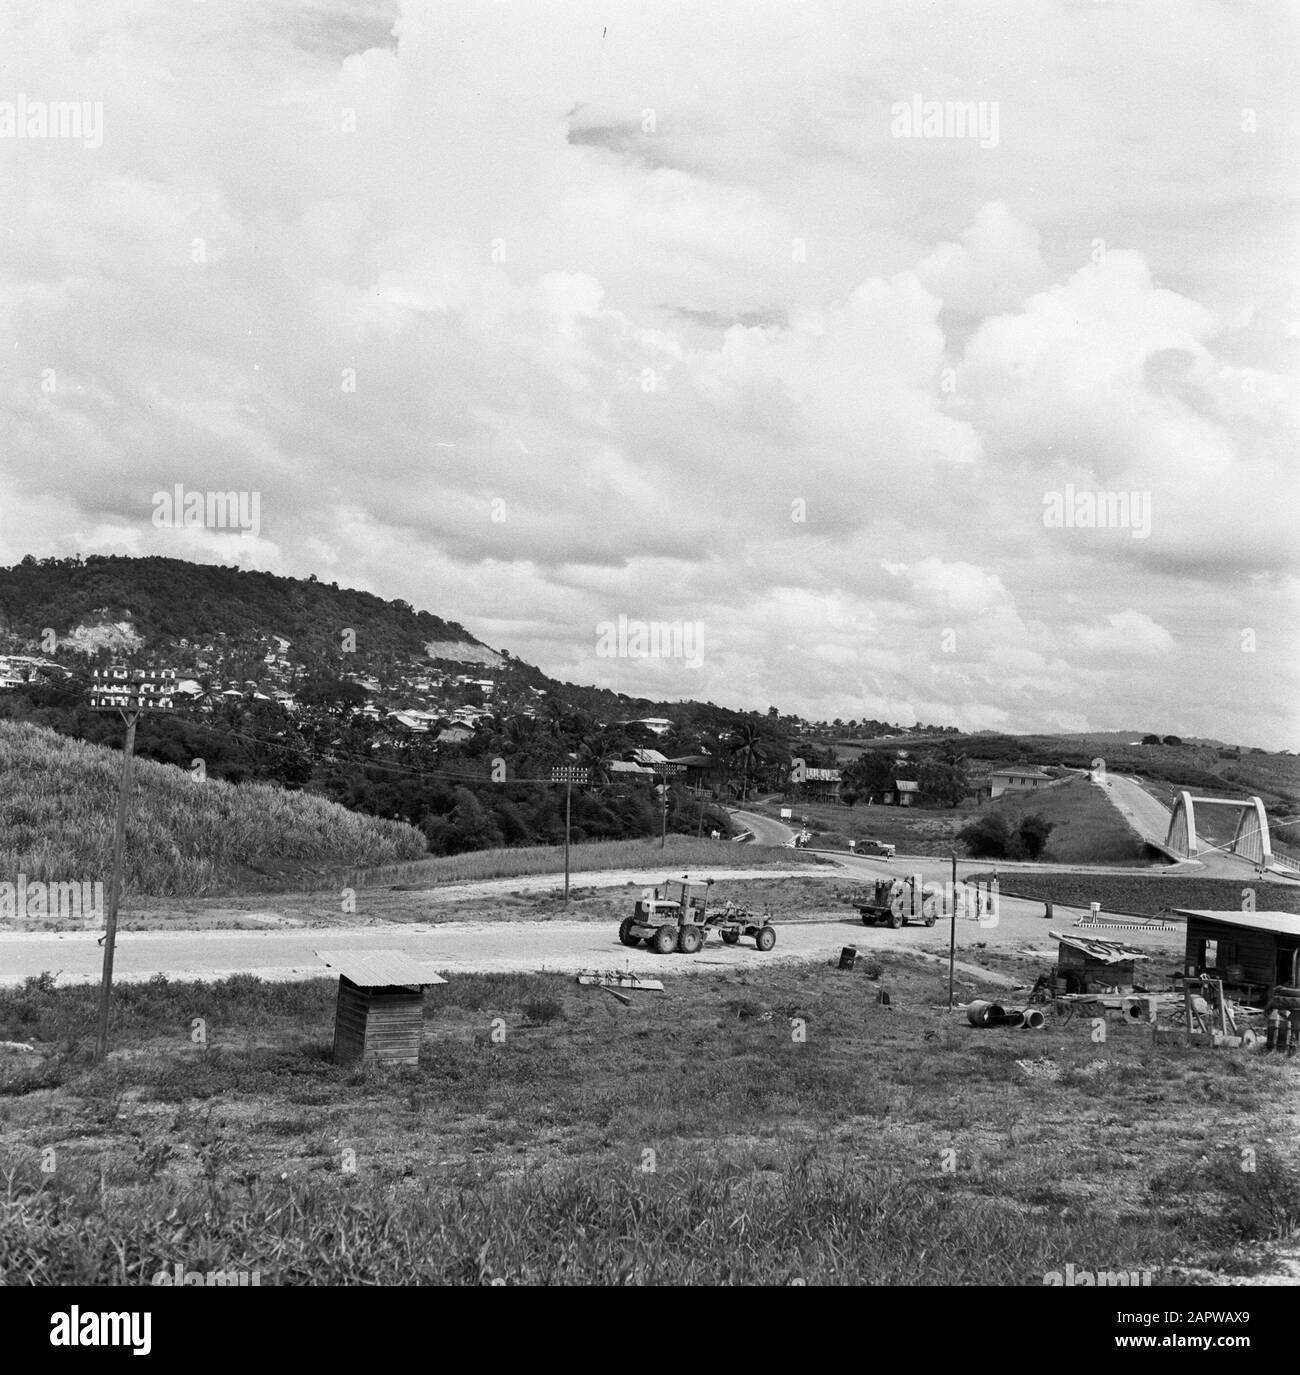 Dutch Antilles and Suriname at the time of the royal visit of Queen Juliana and Prince Bernhard in 1955  Landscape near San Fernando on Trinidad Date: 1 October 1955 Location: San Fernando, Trinidad Keywords: cars, landscapes, tractors Stock Photo